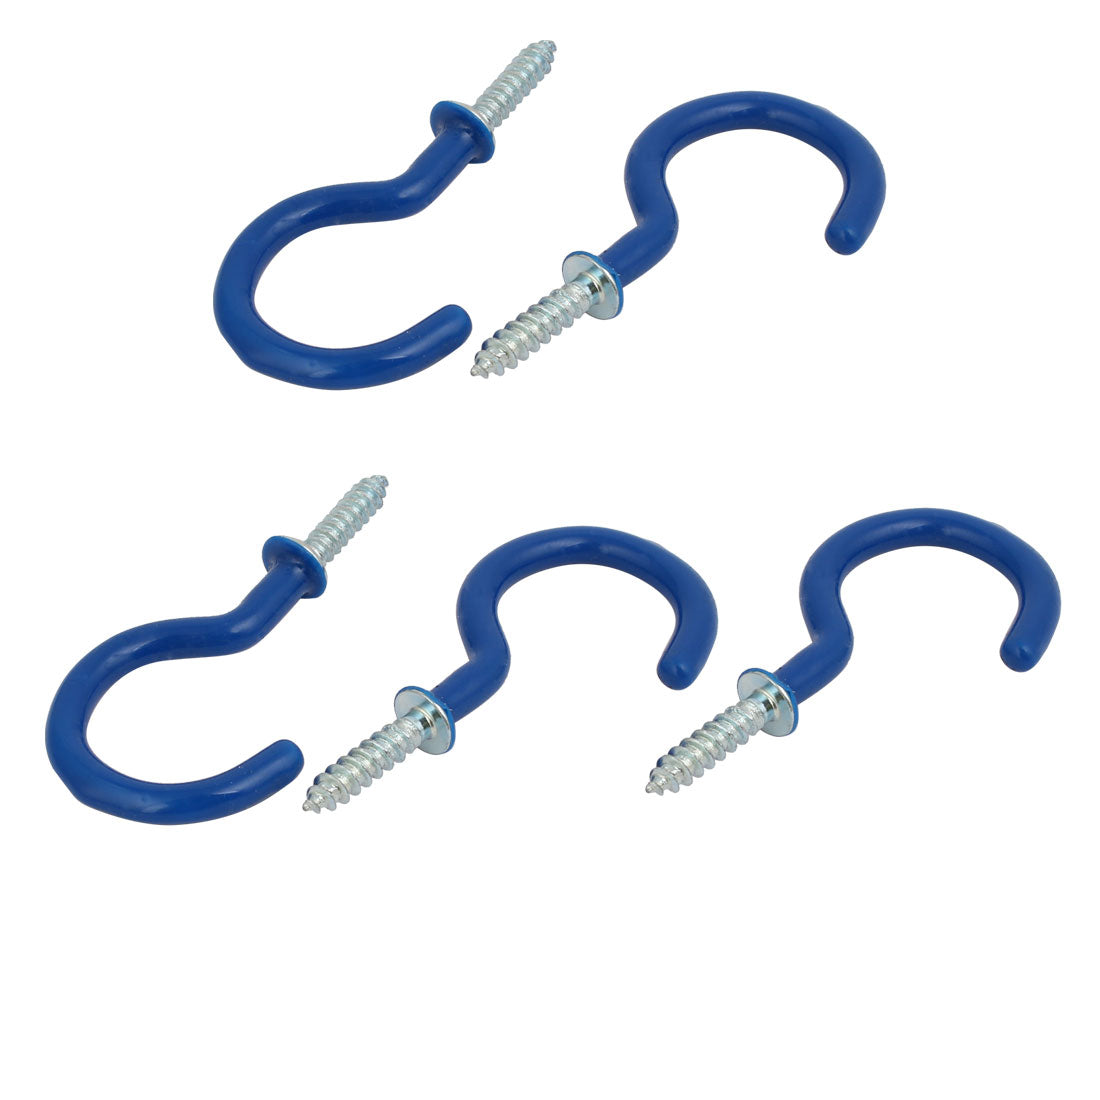 uxcell Uxcell 1-1/2 Inch Plastic Coated Screw-in Open Cup Ceiling Hooks Hangers Blue 5pcs